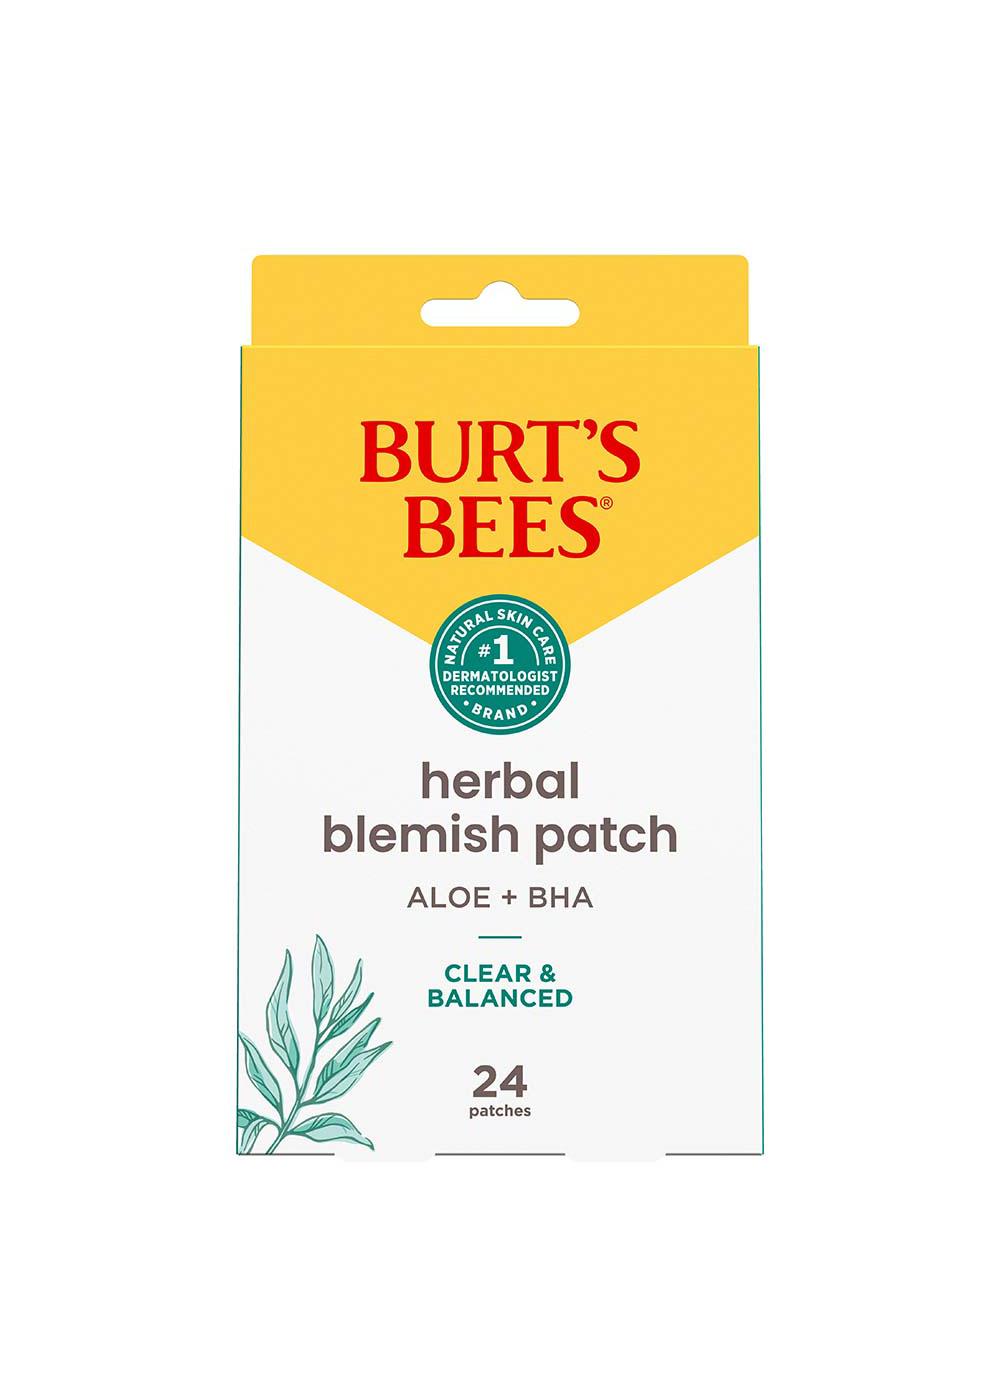 Burt's Bees Clear & Balanced Herbal Blemish Patch; image 1 of 2